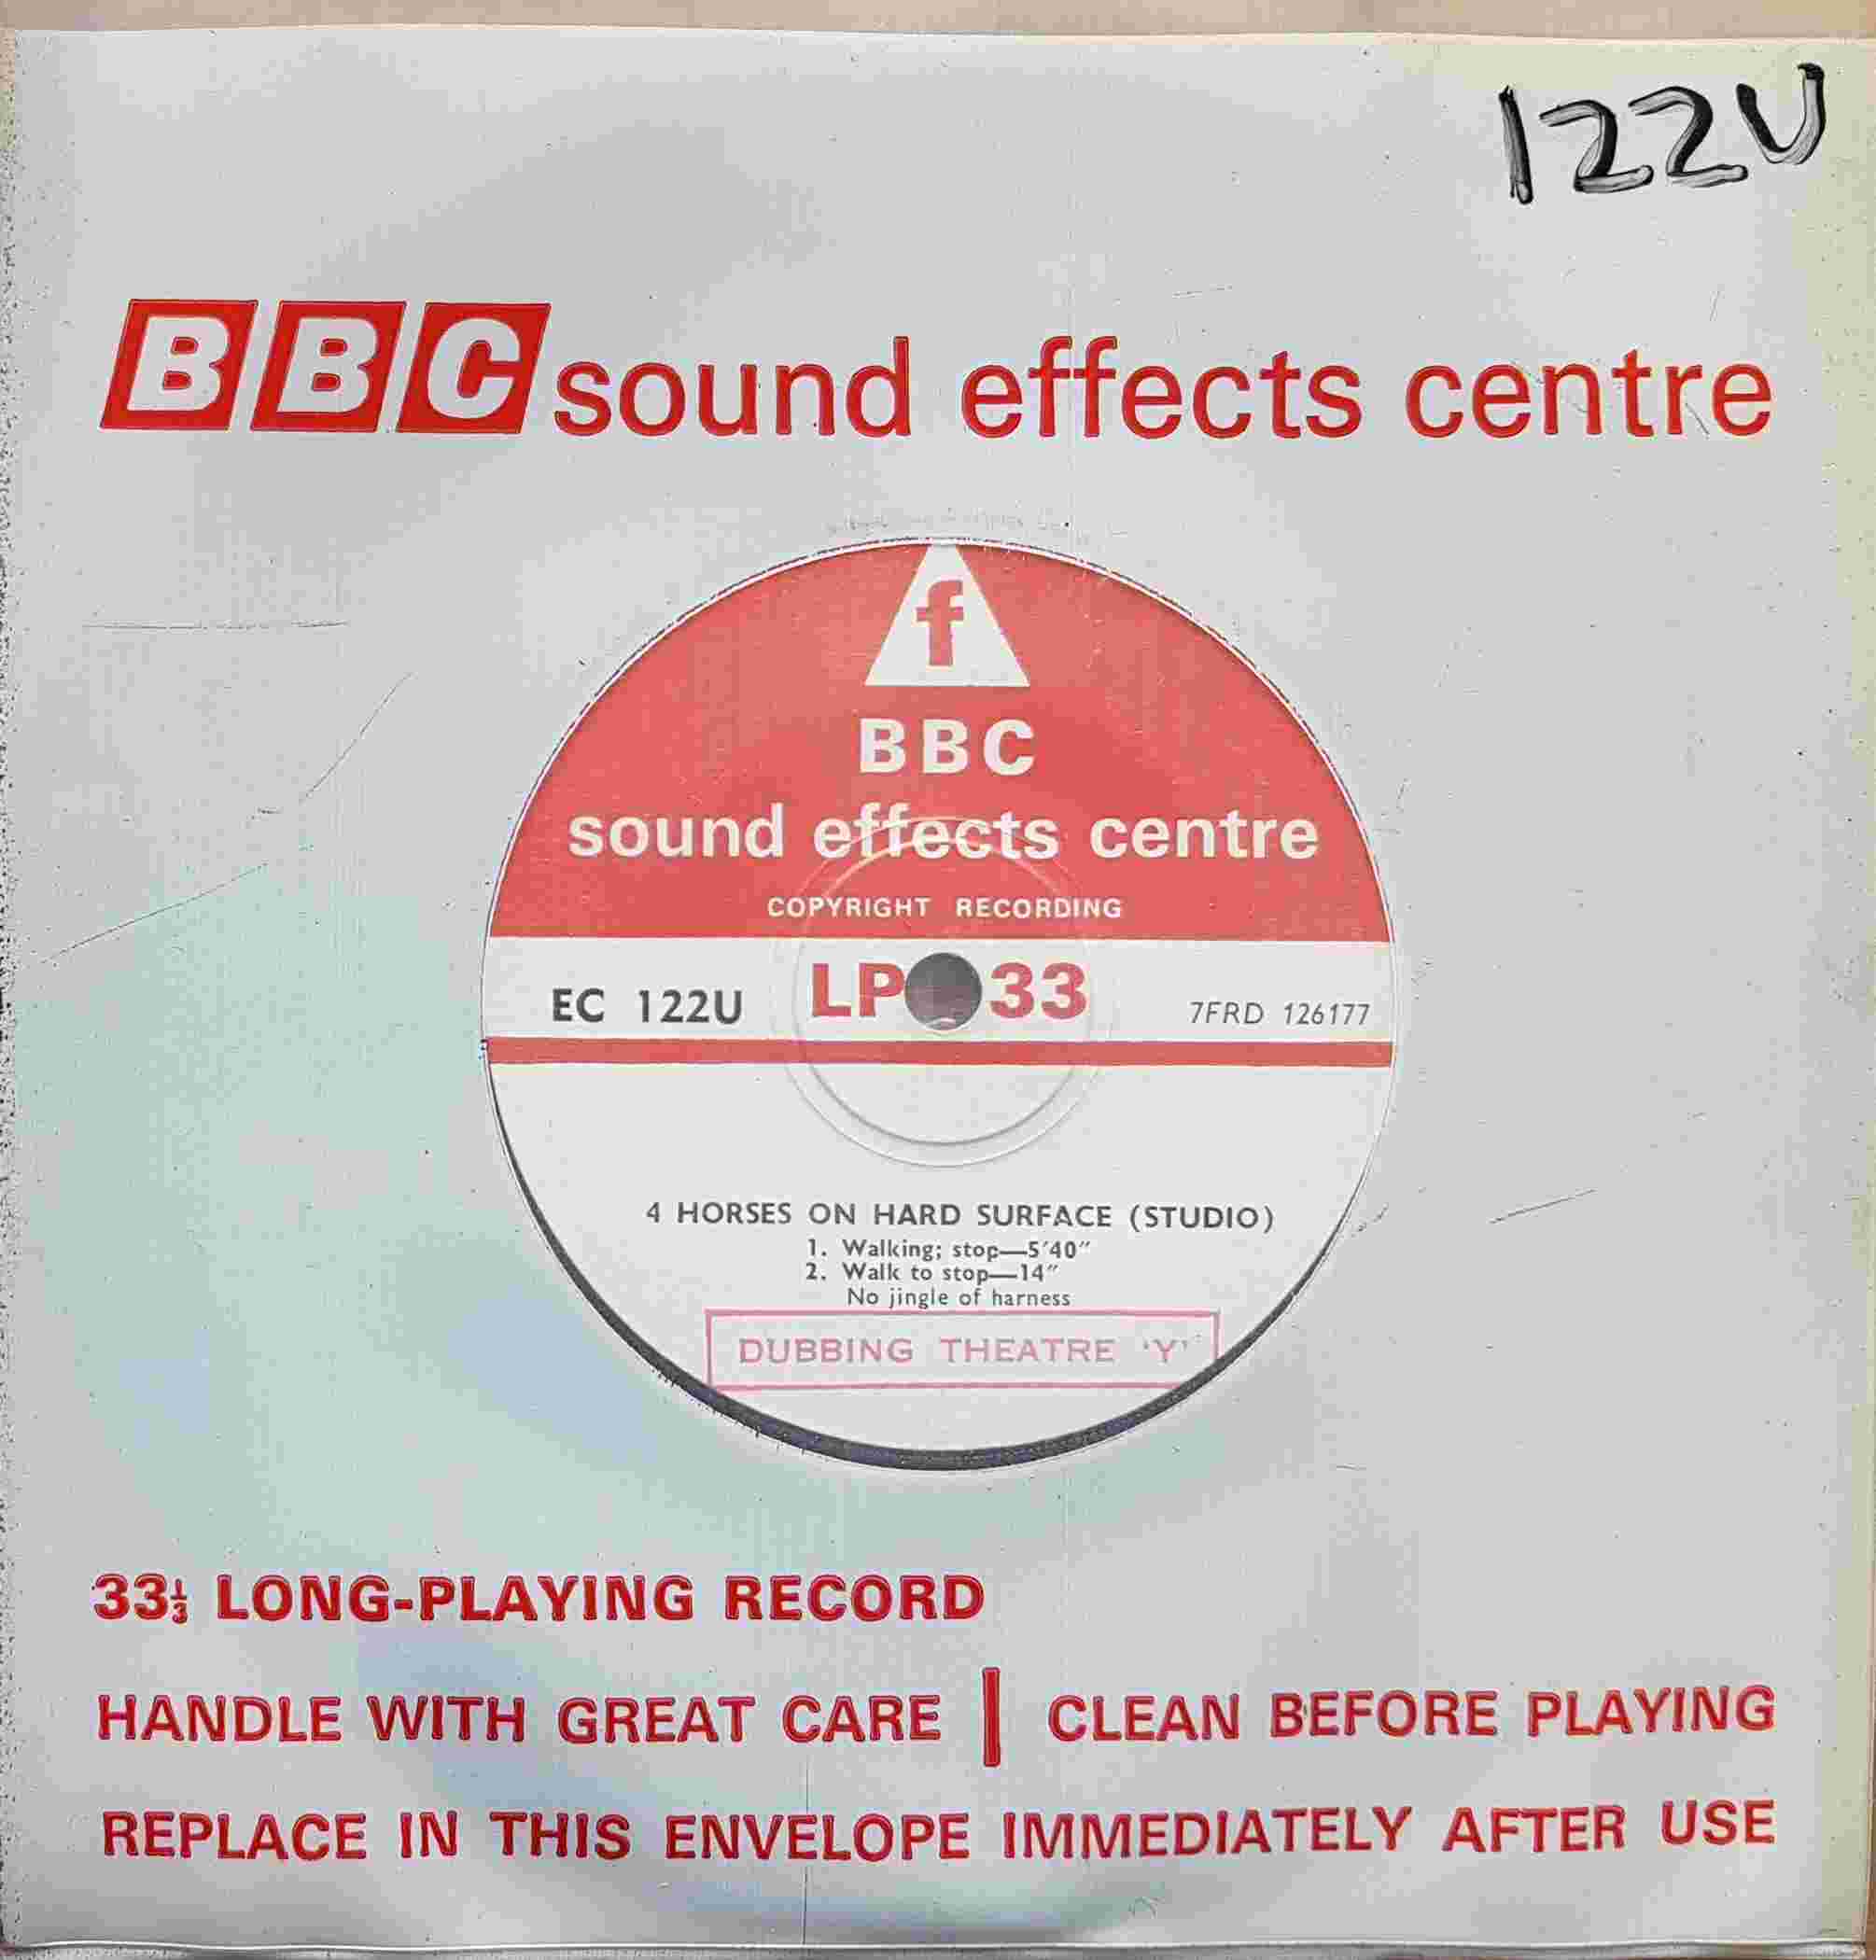 Picture of EC 122U 4 horses on hard surface (Studio) by artist Not registered from the BBC records and Tapes library